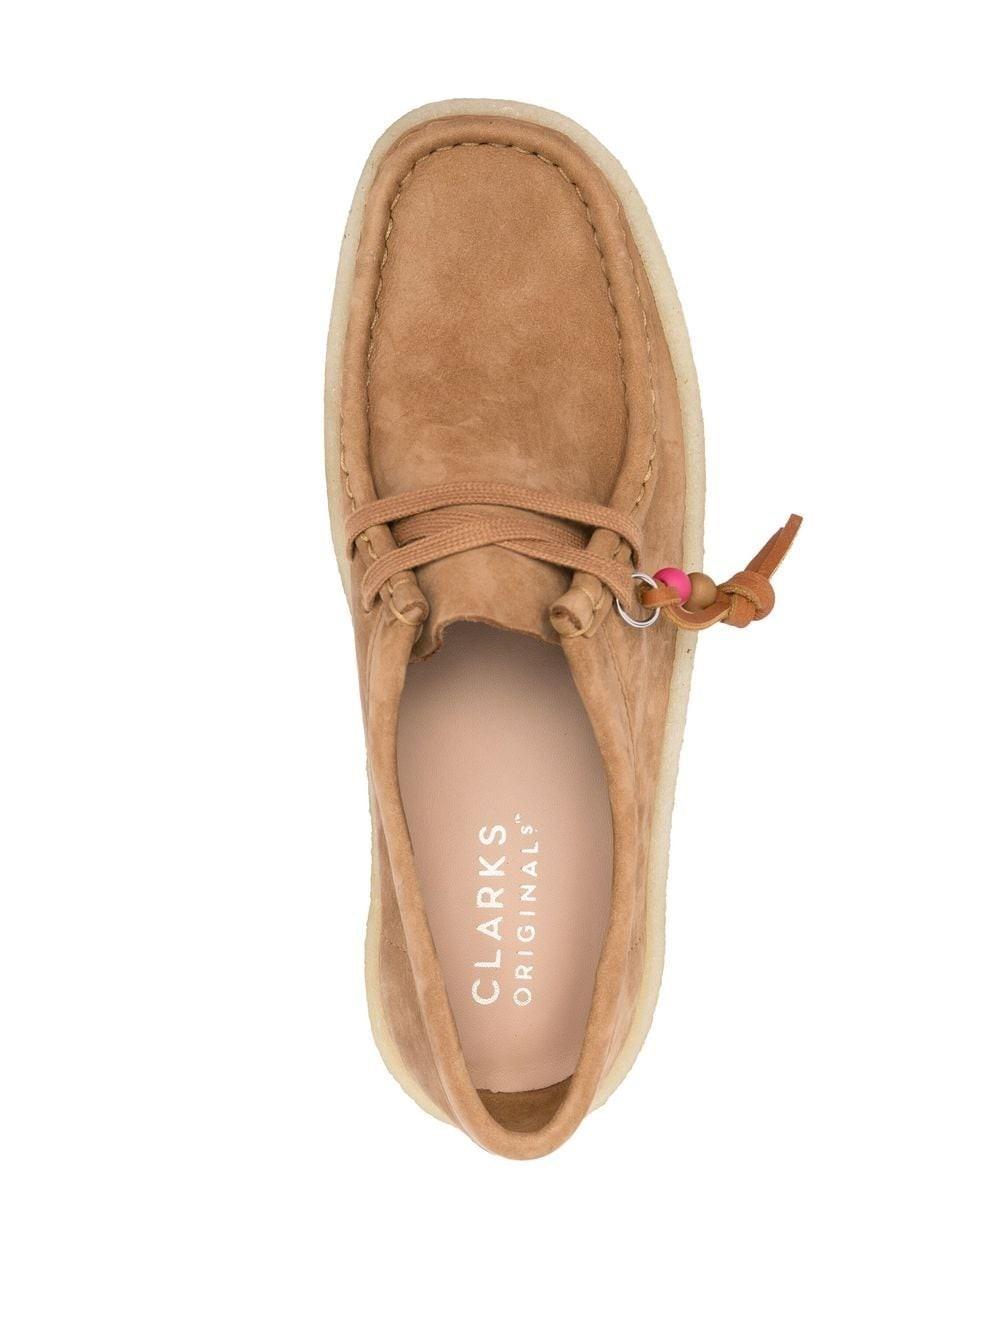 Clarks Wallabee Cup Suede Shoes in Brown | Lyst